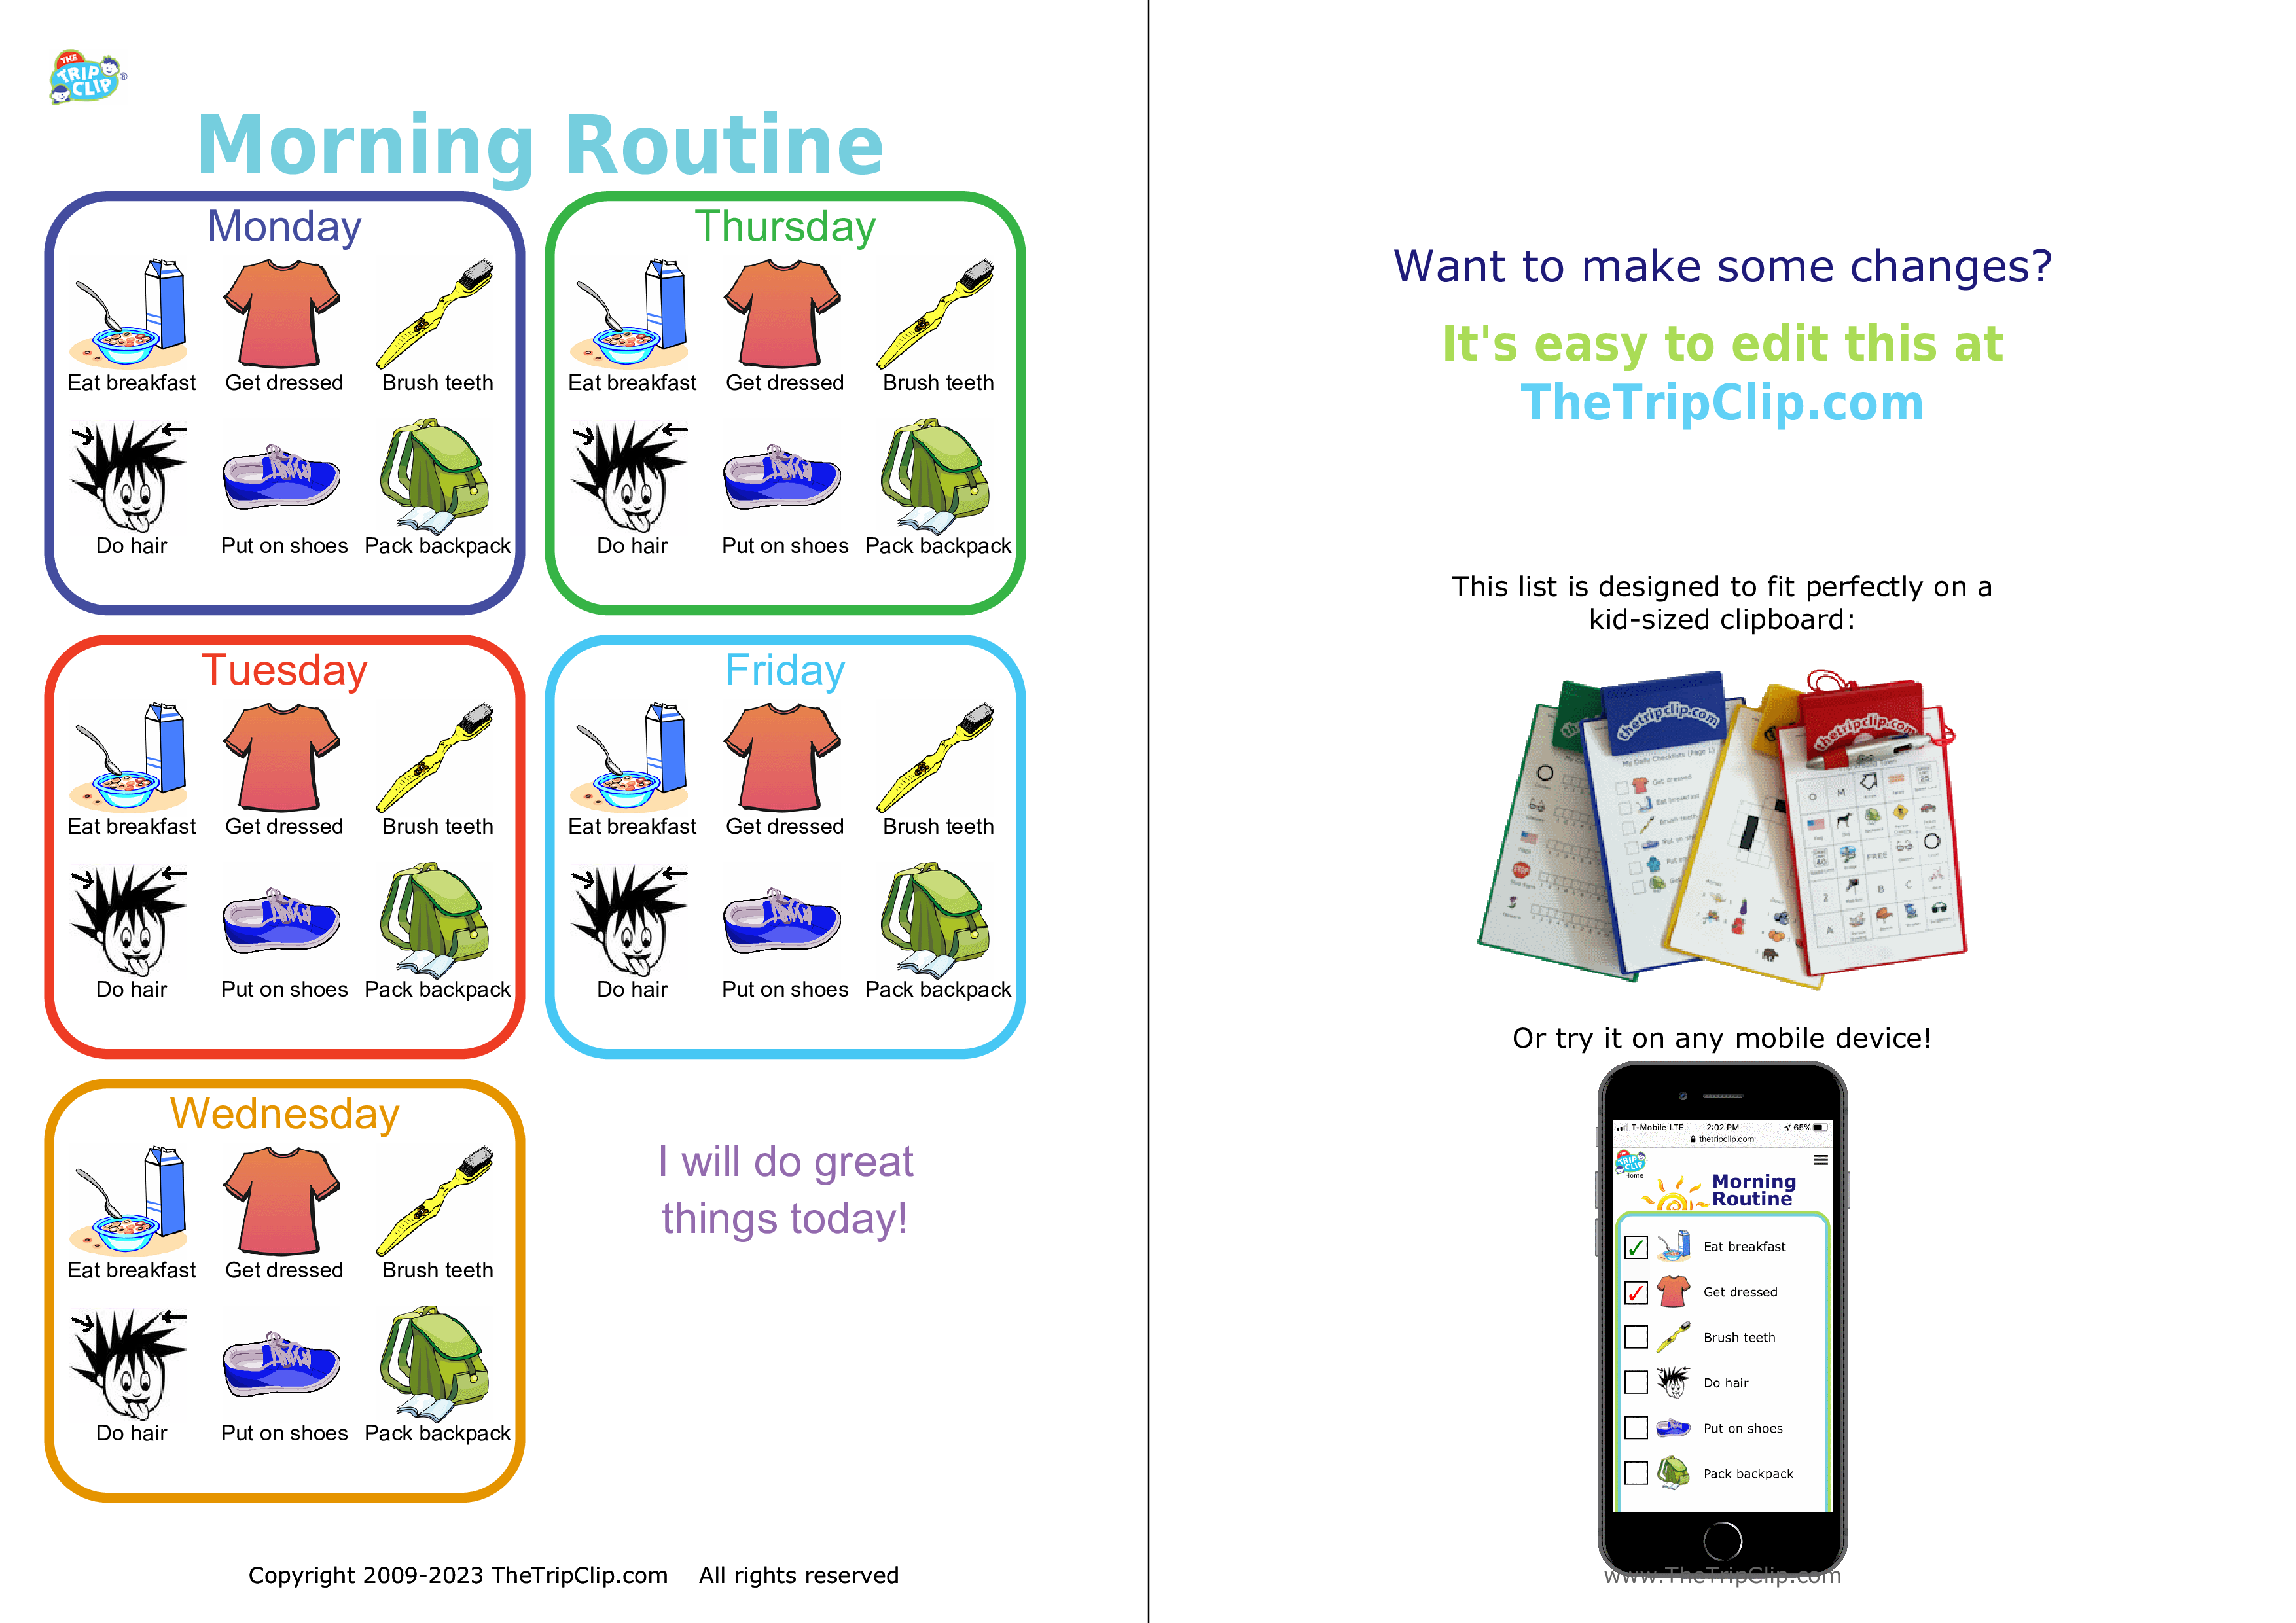 Morning routine picture checklist for kids, Monday - Friday